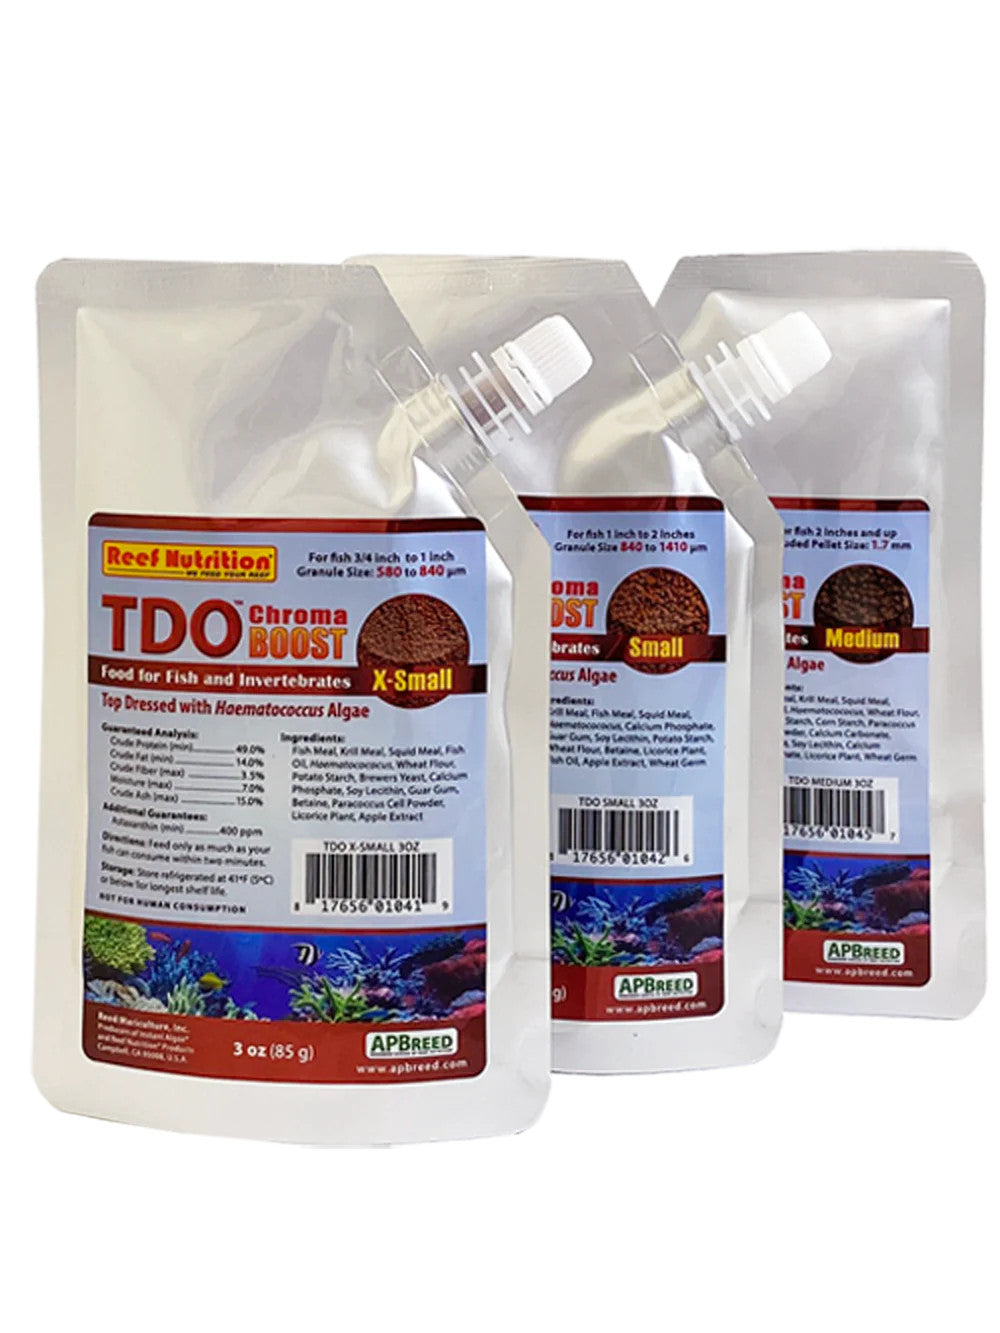 Reef Nutrition TDO Chroma BOOST value pack For sale | Splashy Fish